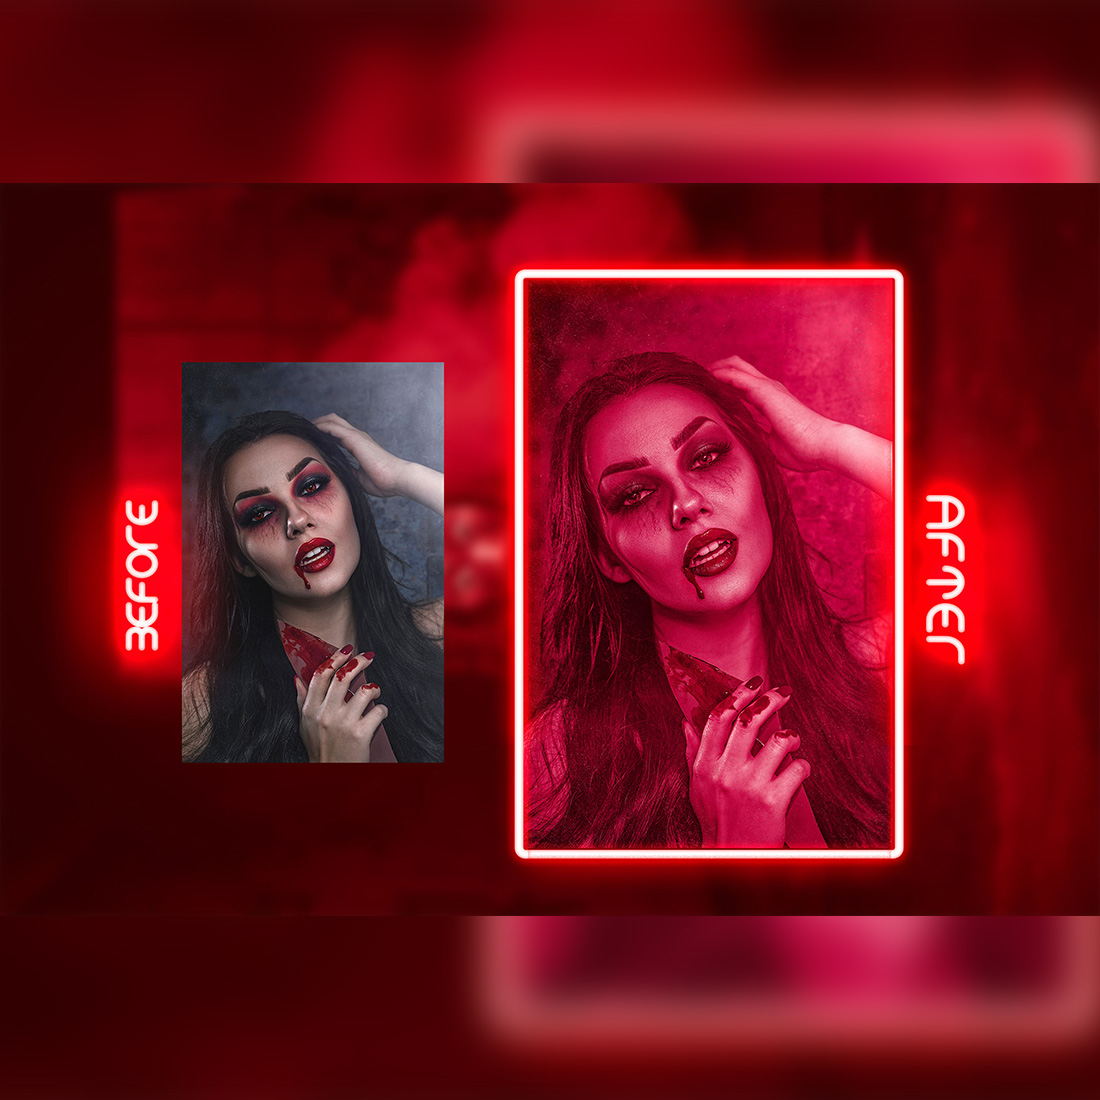 12 Photoshop Actions, Scary Light Ps Action, Spooky ACR Preset, Halloween Ps Filter, Atn Portrait And Lifestyle Theme For Instagram, Blogge preview image.